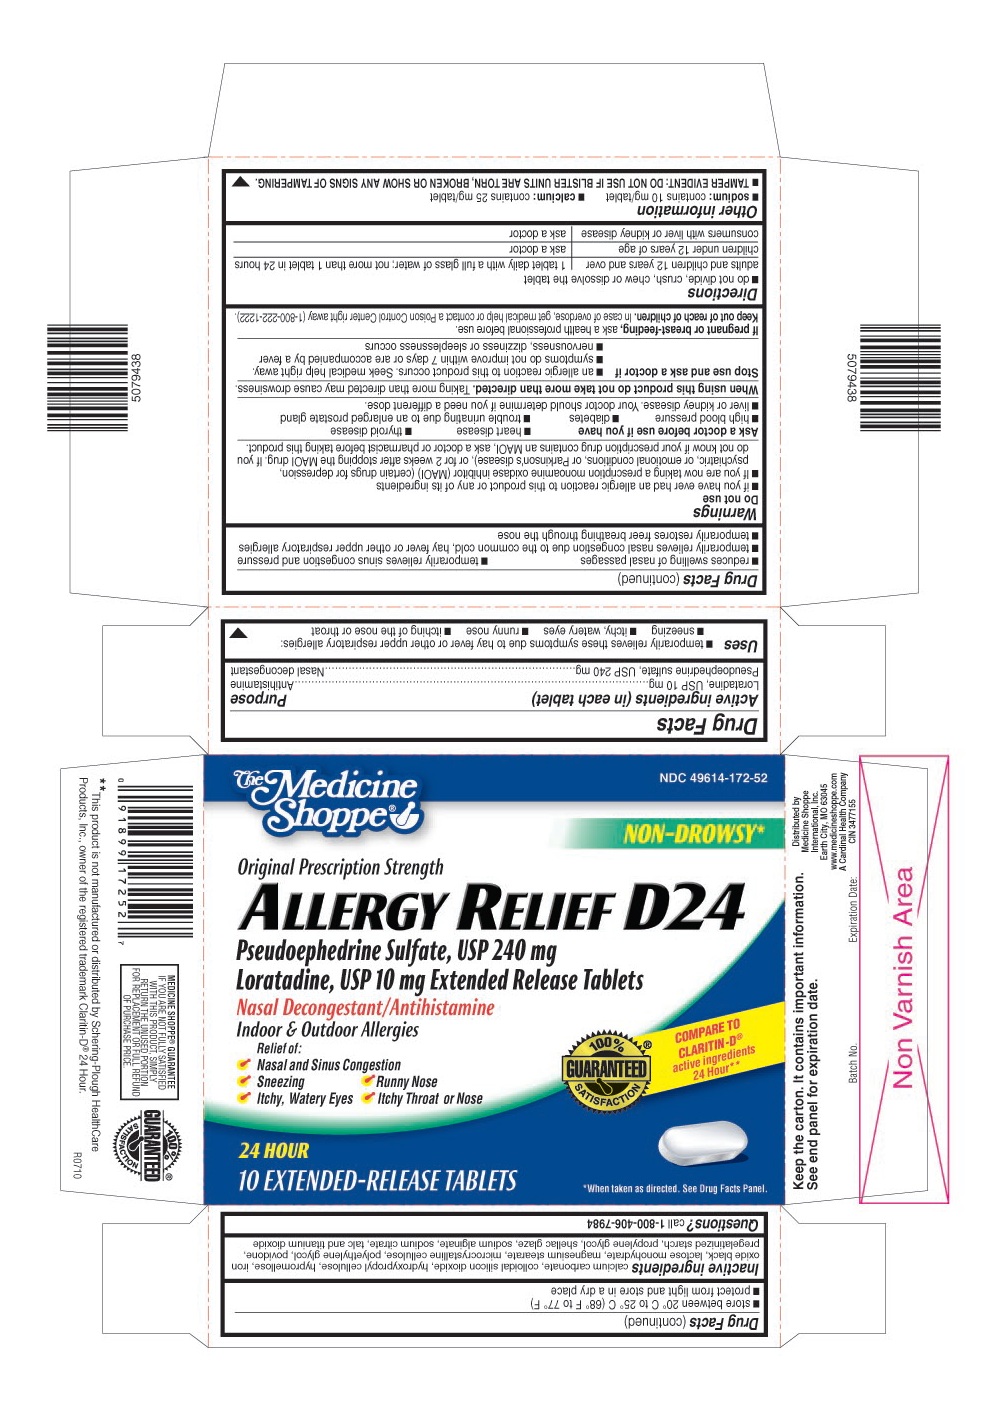 This is the blister carton label for Medicine Shoppe 10 count Allergy Relief D24 film coated, extended-release tablets.